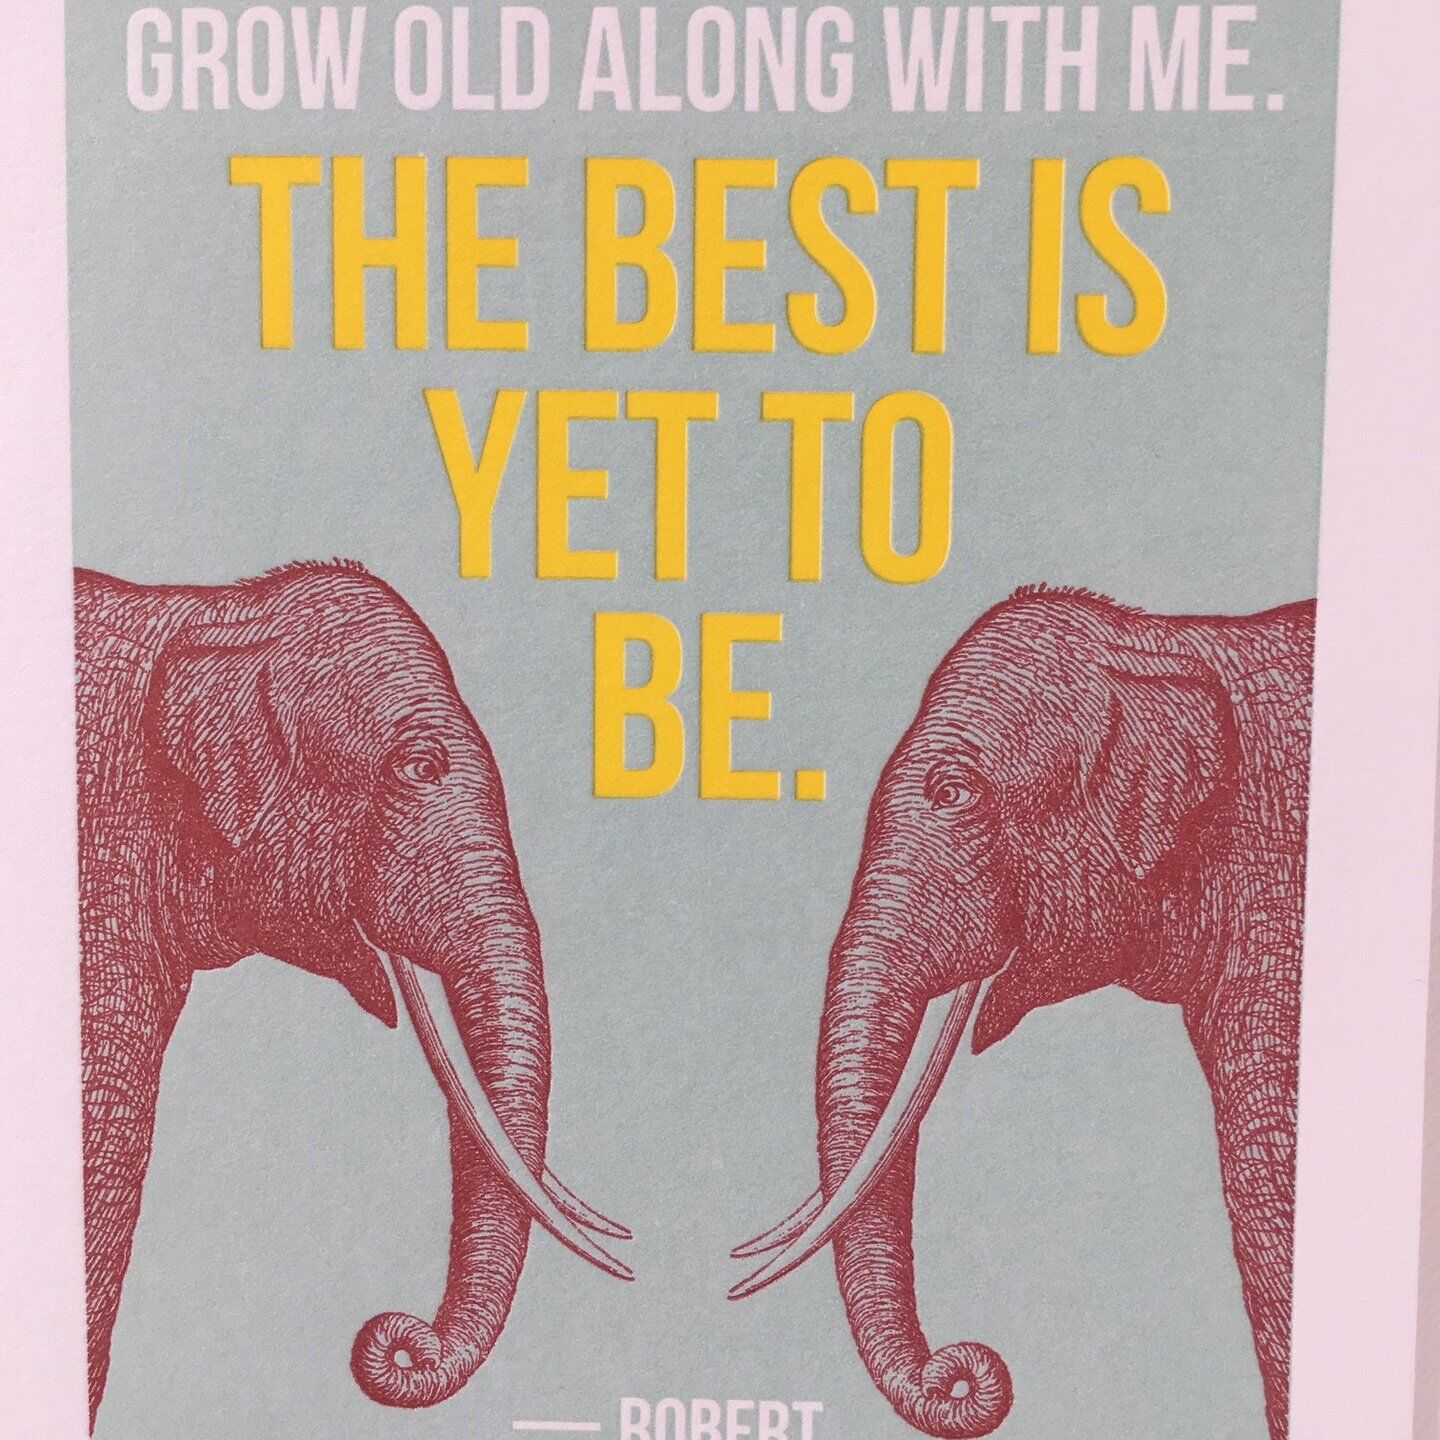 Card (Archivist Gallery): Grow Old Along With Me